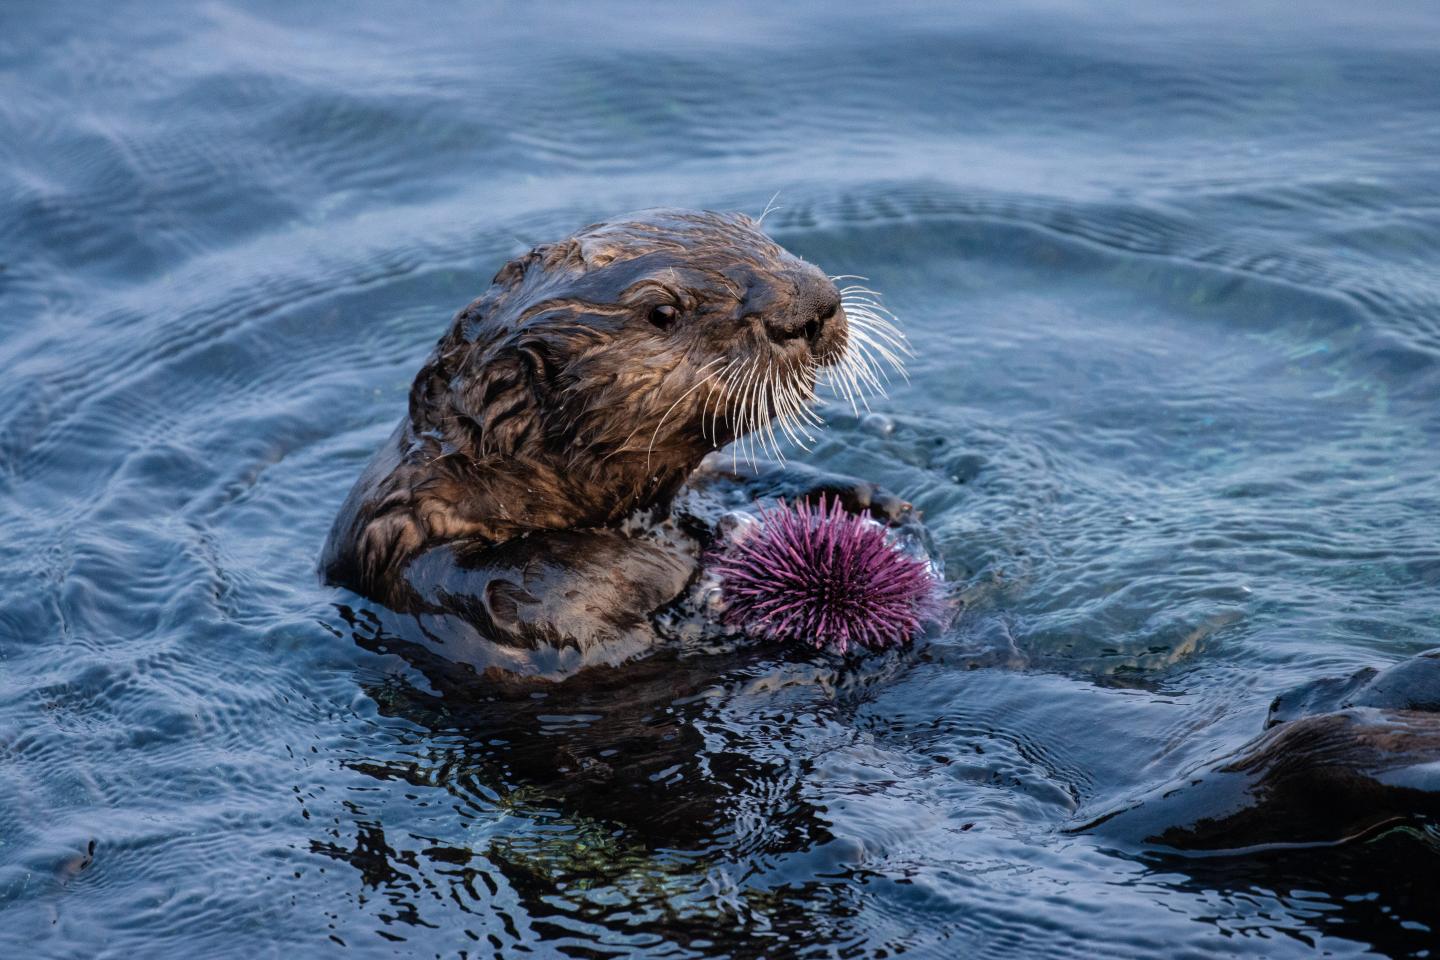 Sea otter with urchin